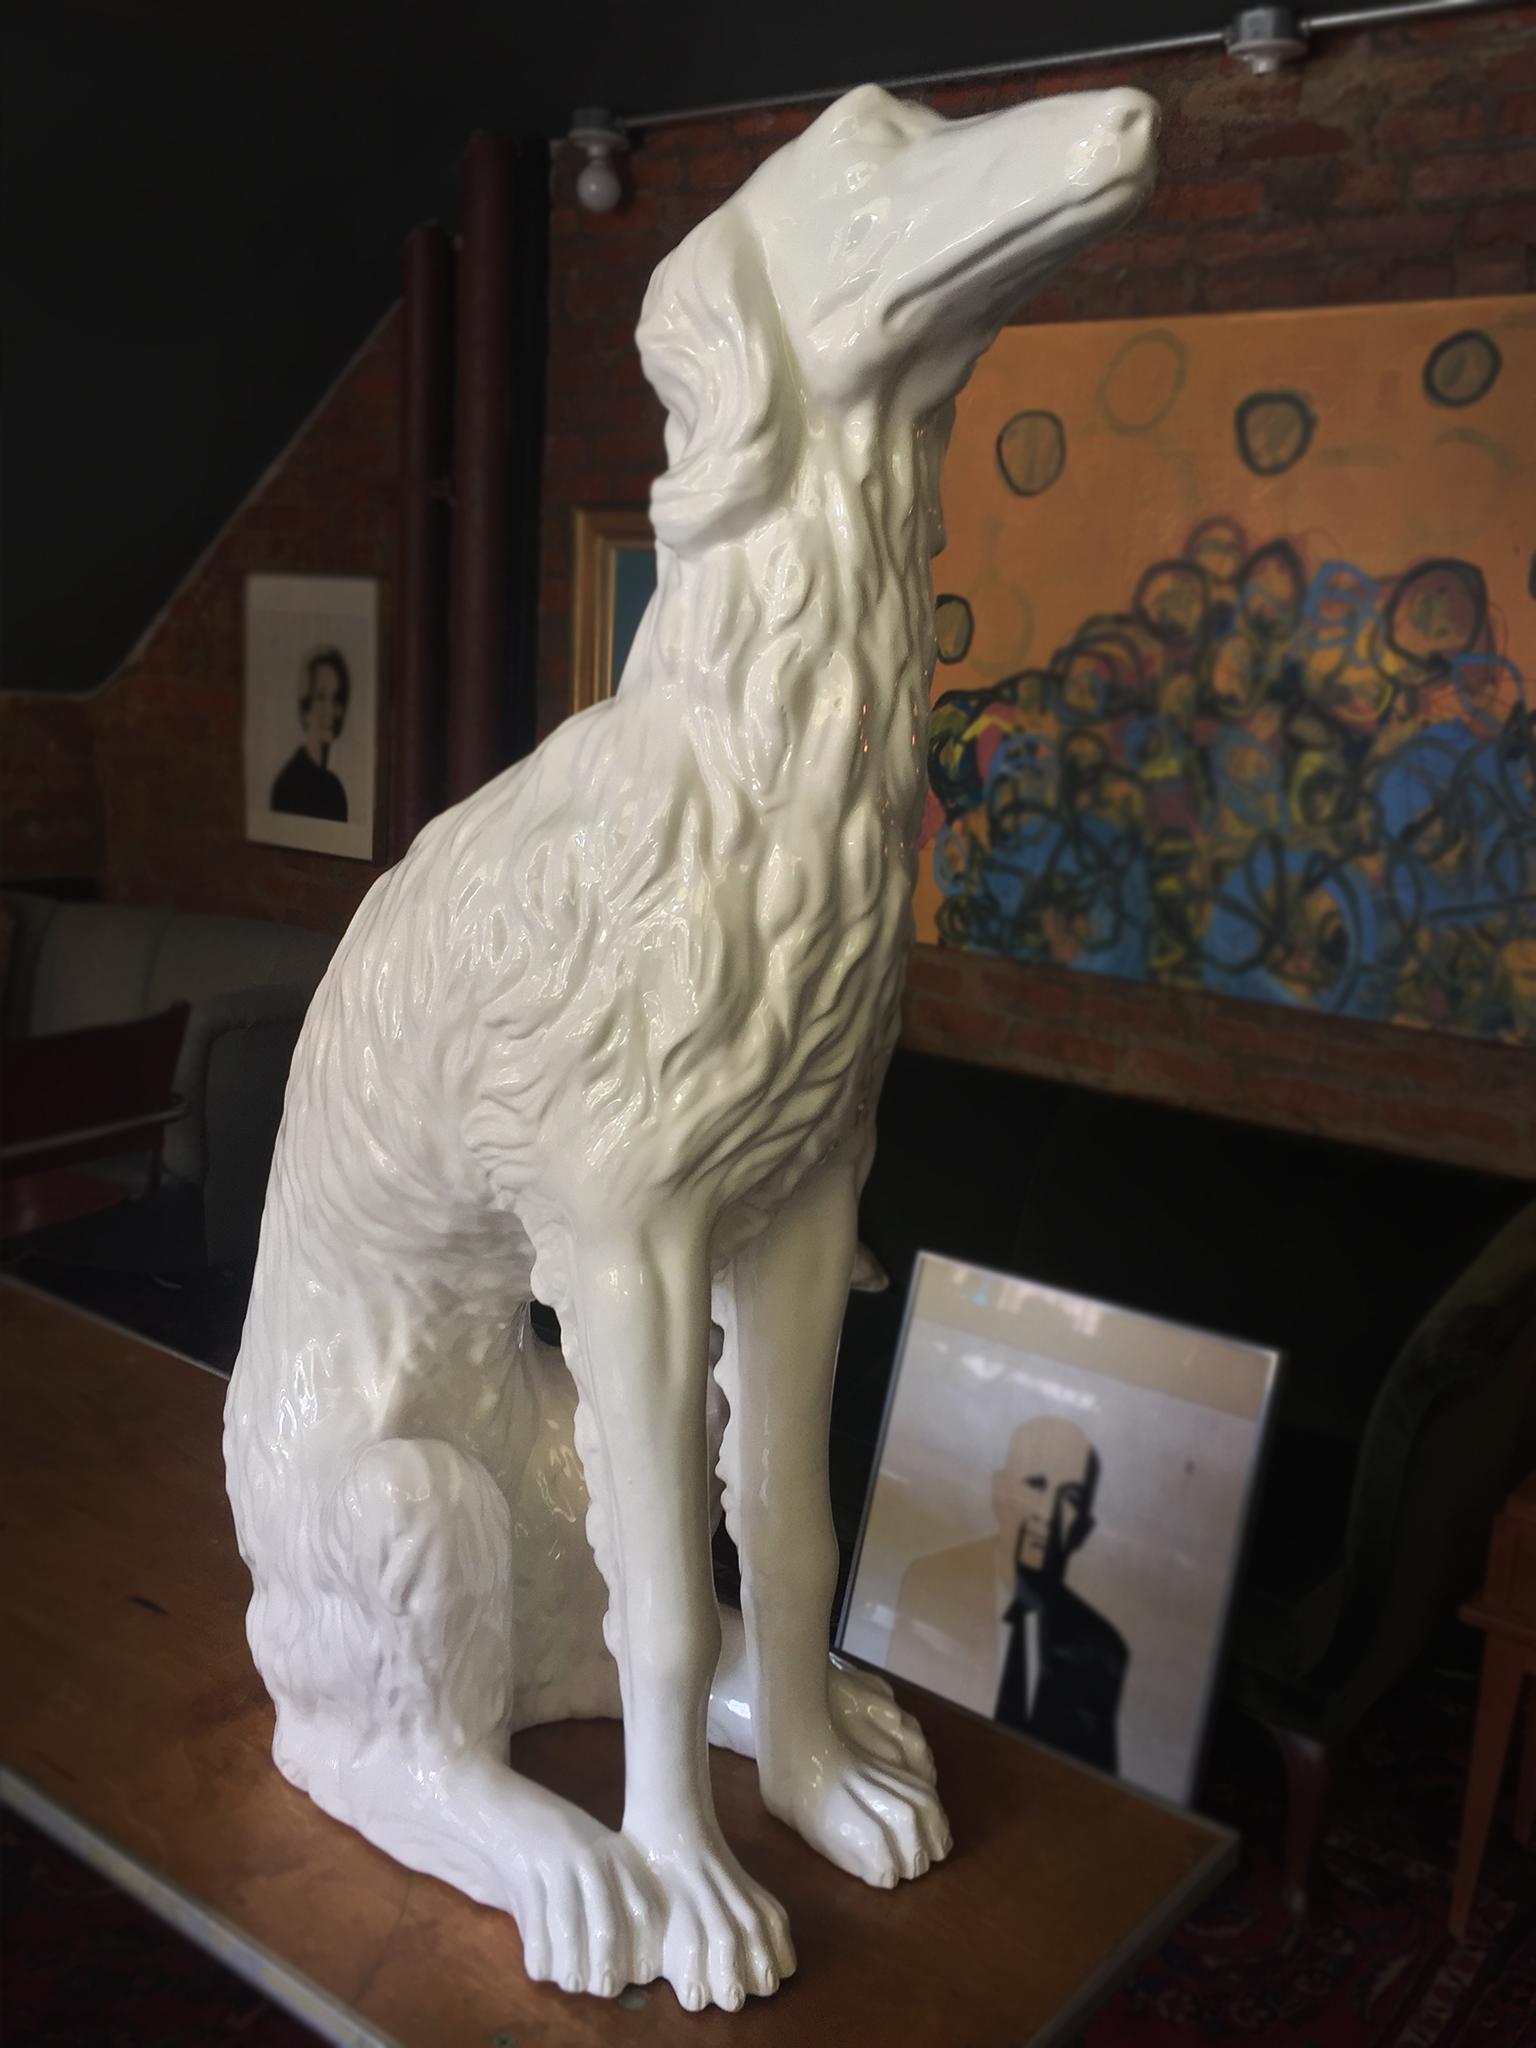 20th century bone-white porcelain figure of a Russian Wolfhound, also known as a Borzoi dog. It is crafted with attention to the textural details of fur. Not only is the sculpture life-size, it also radiates with the warm character we might expect